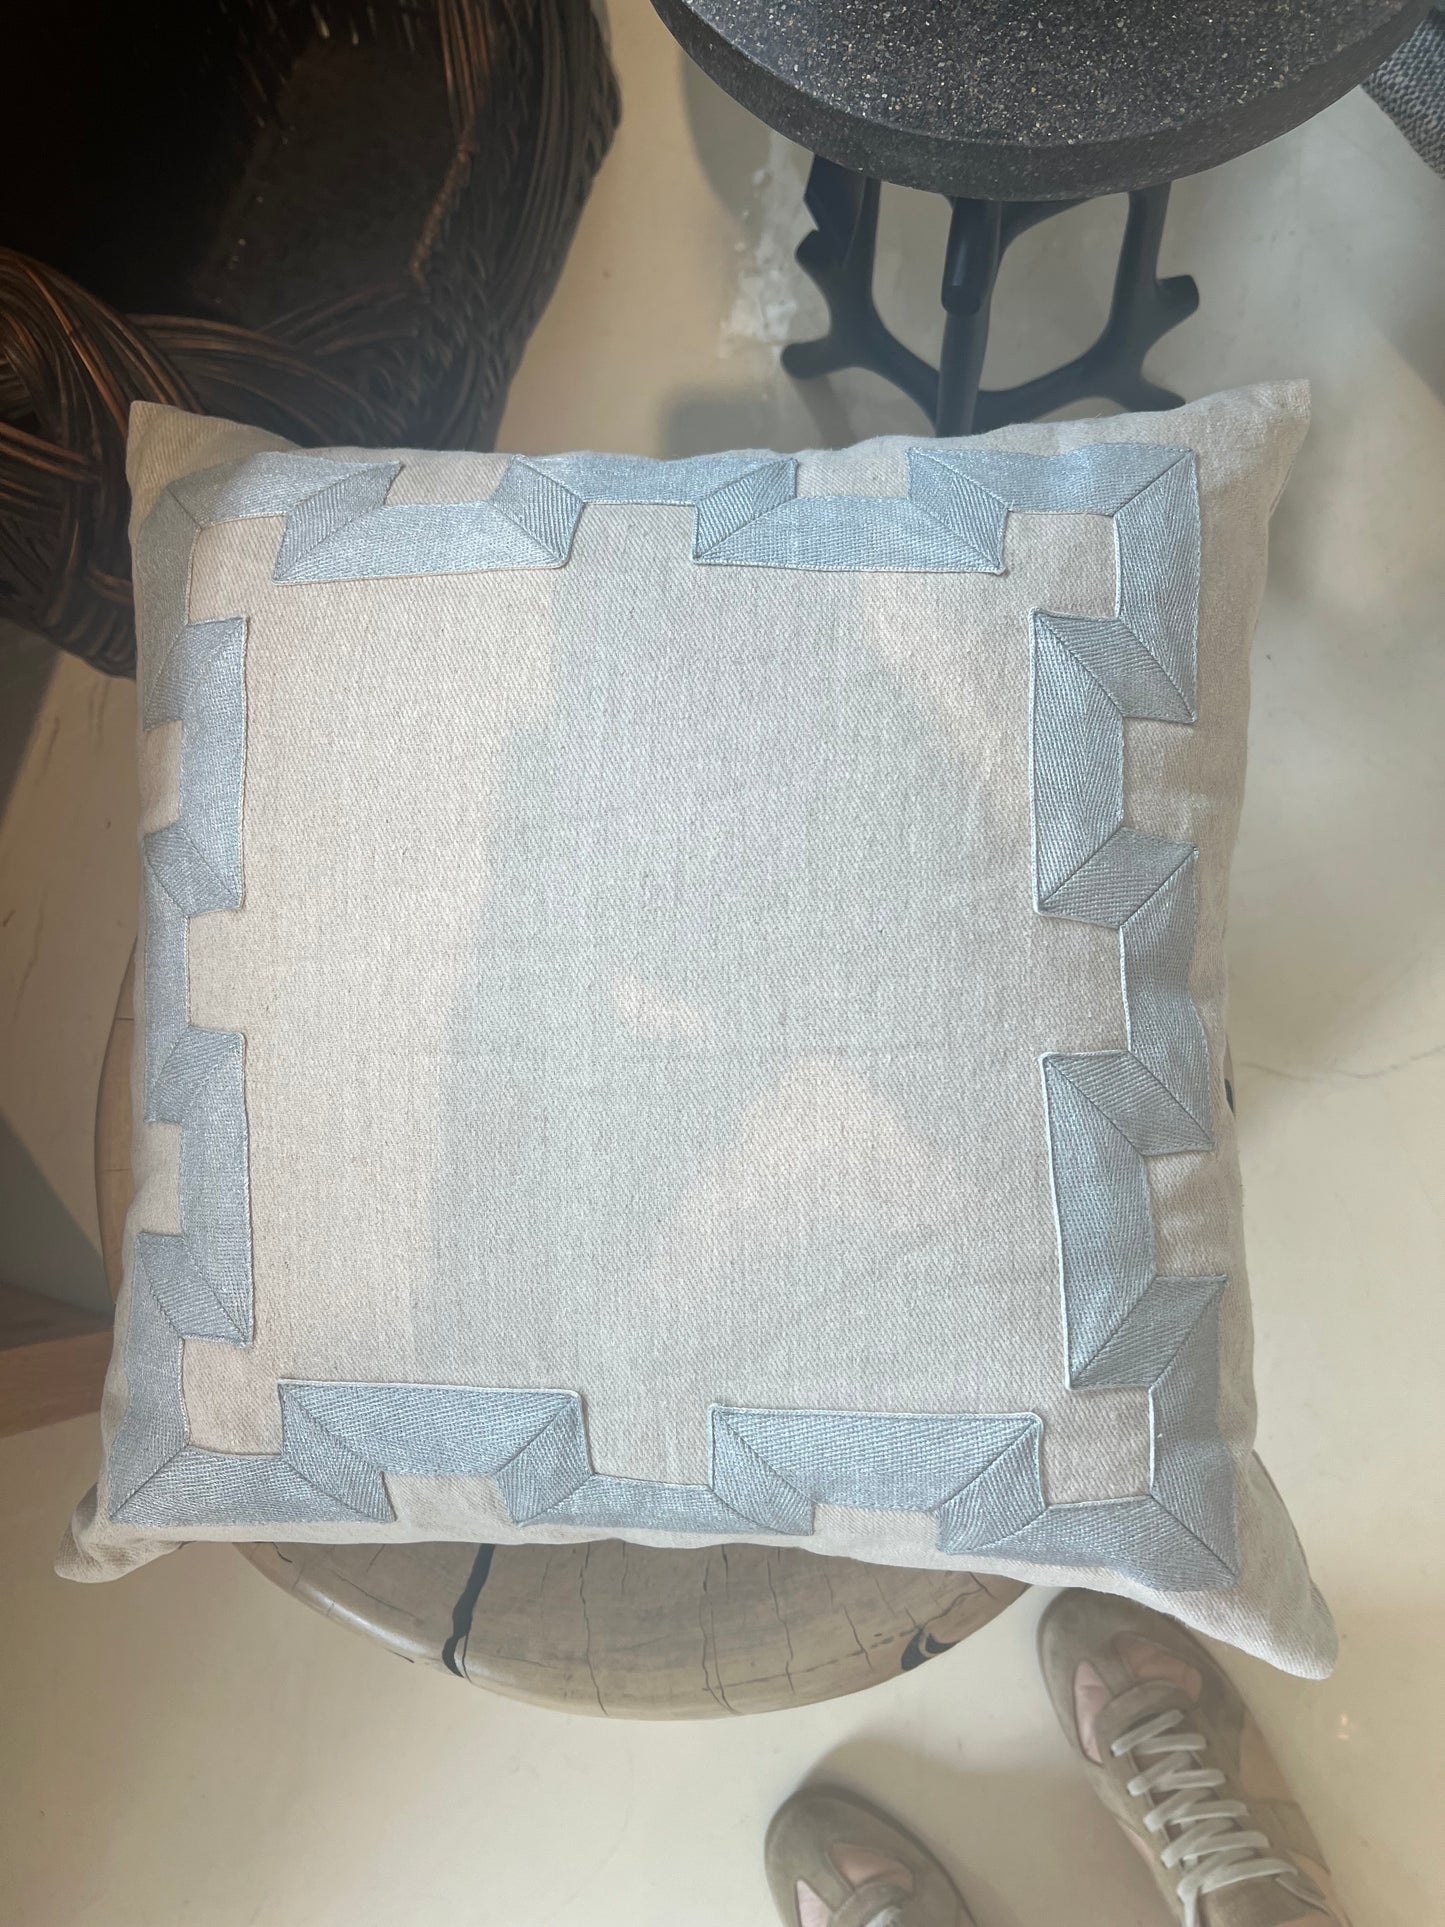 Tan and blue emb outline pillow